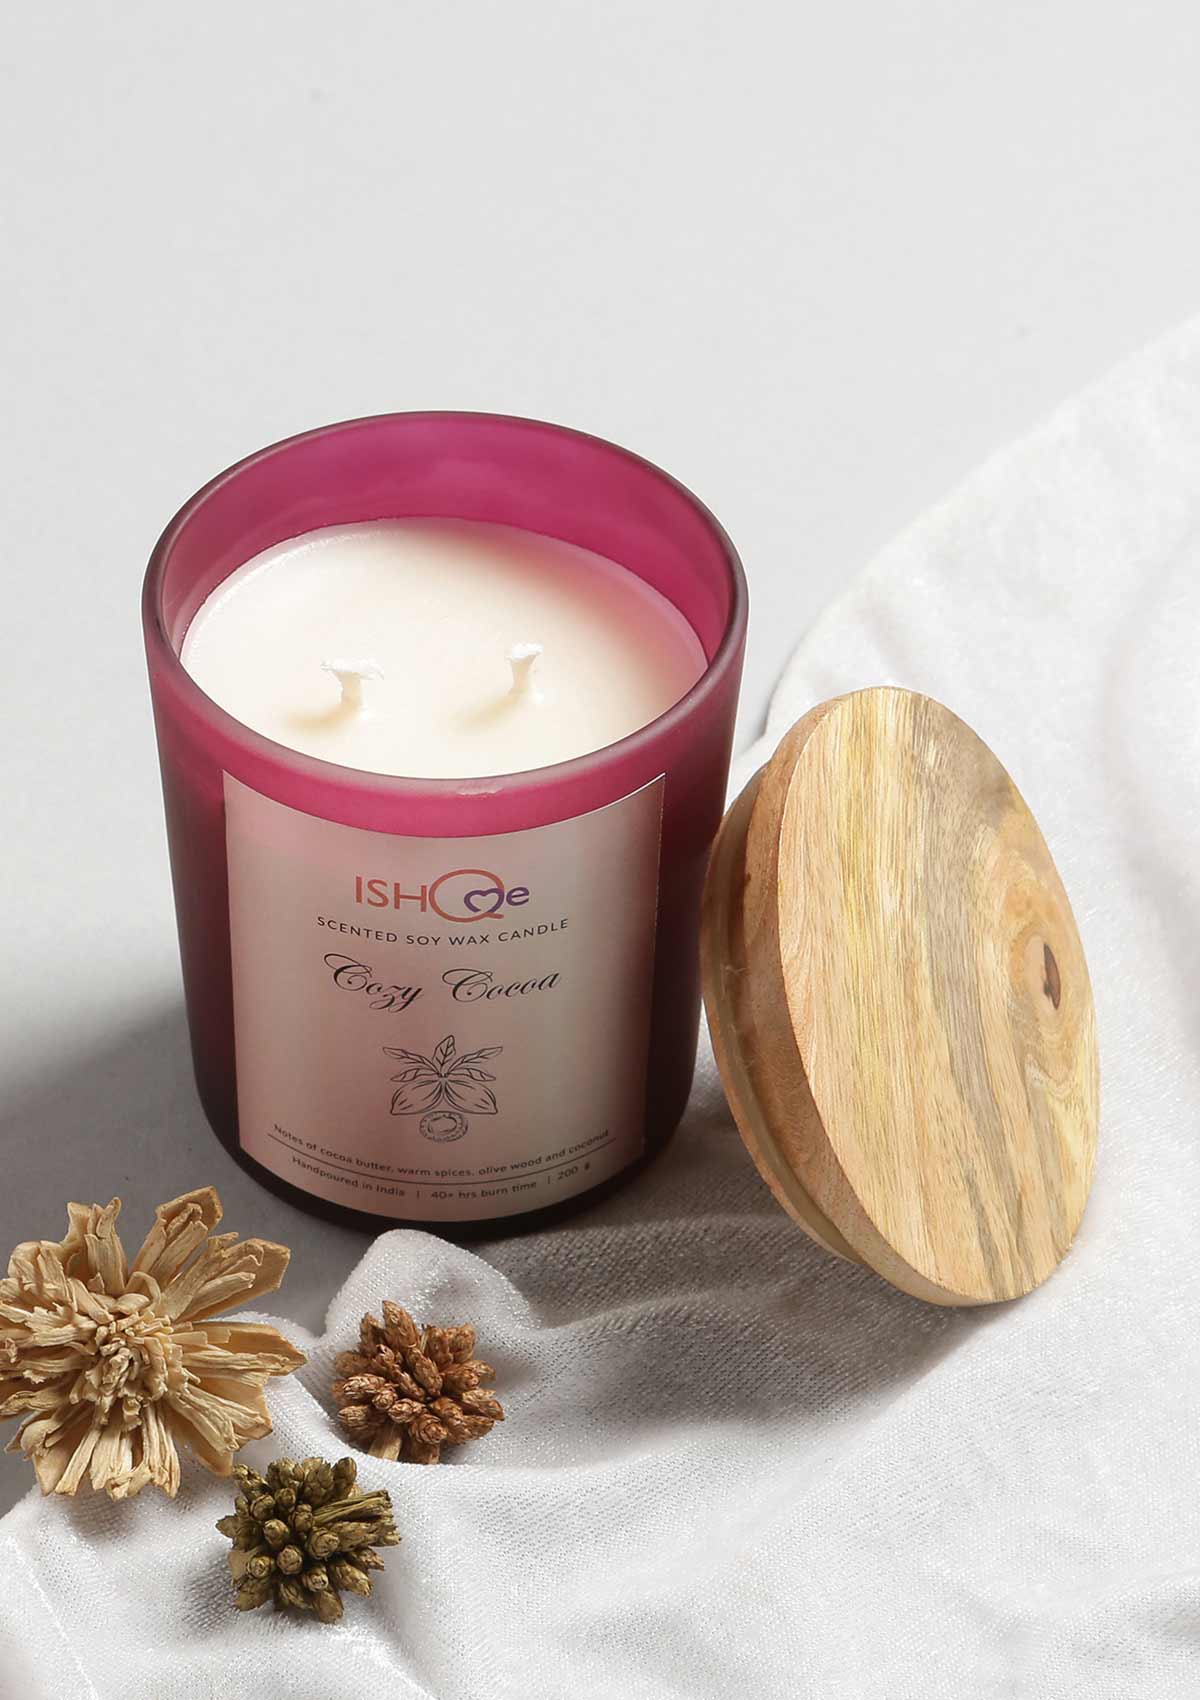 Scented Soy Wax Candle - Cozy Cocoa - IshqMe